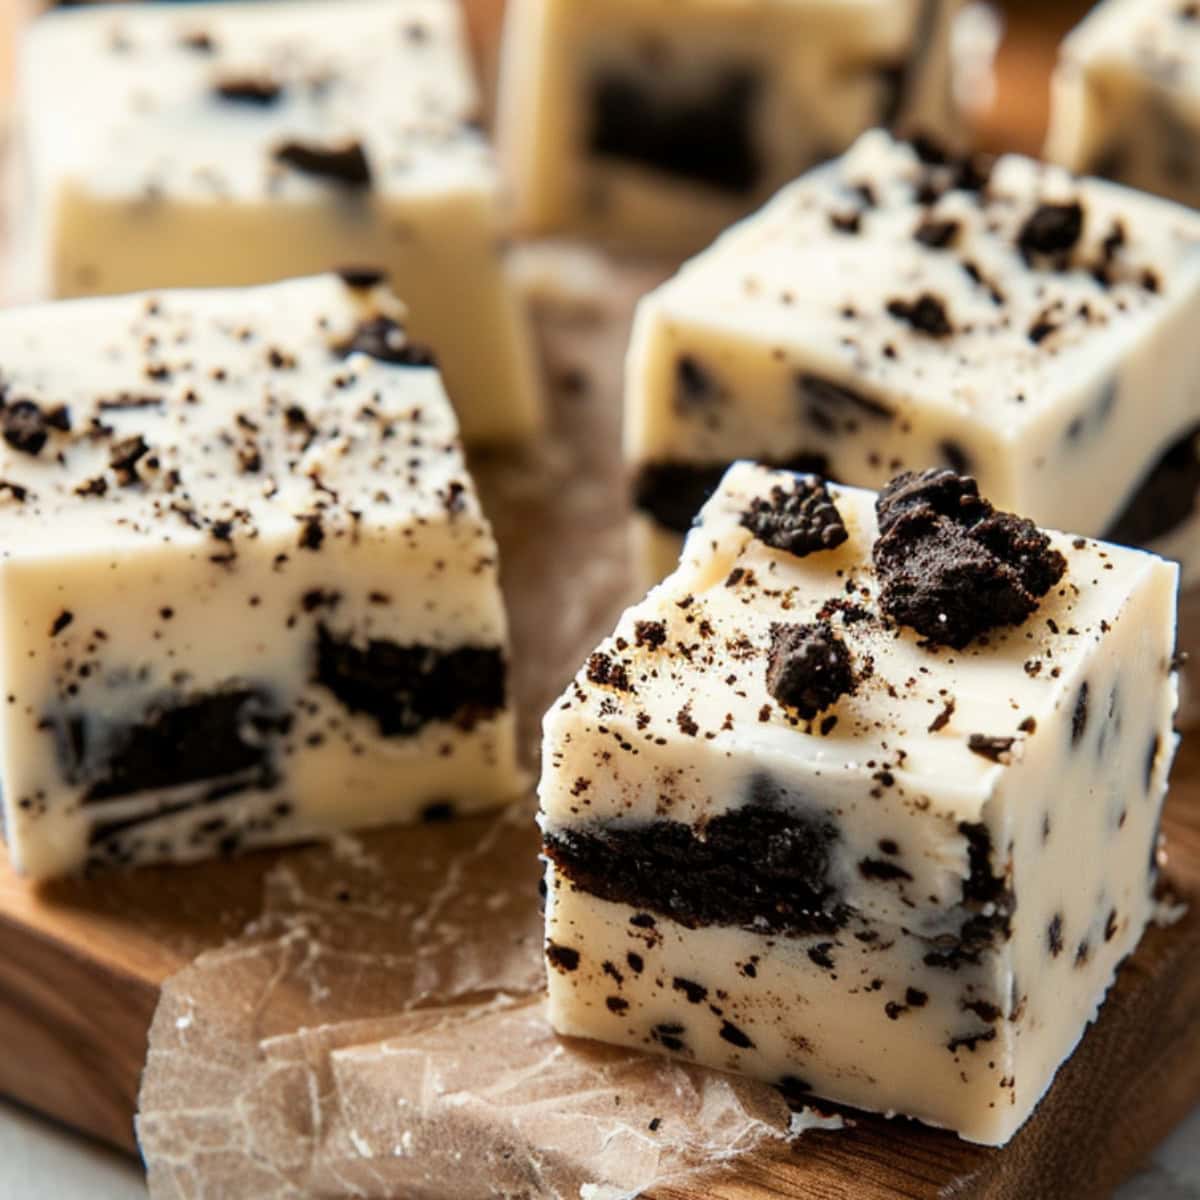 Oreo fudge sliced in cubes on a wooden board with parchment paper.